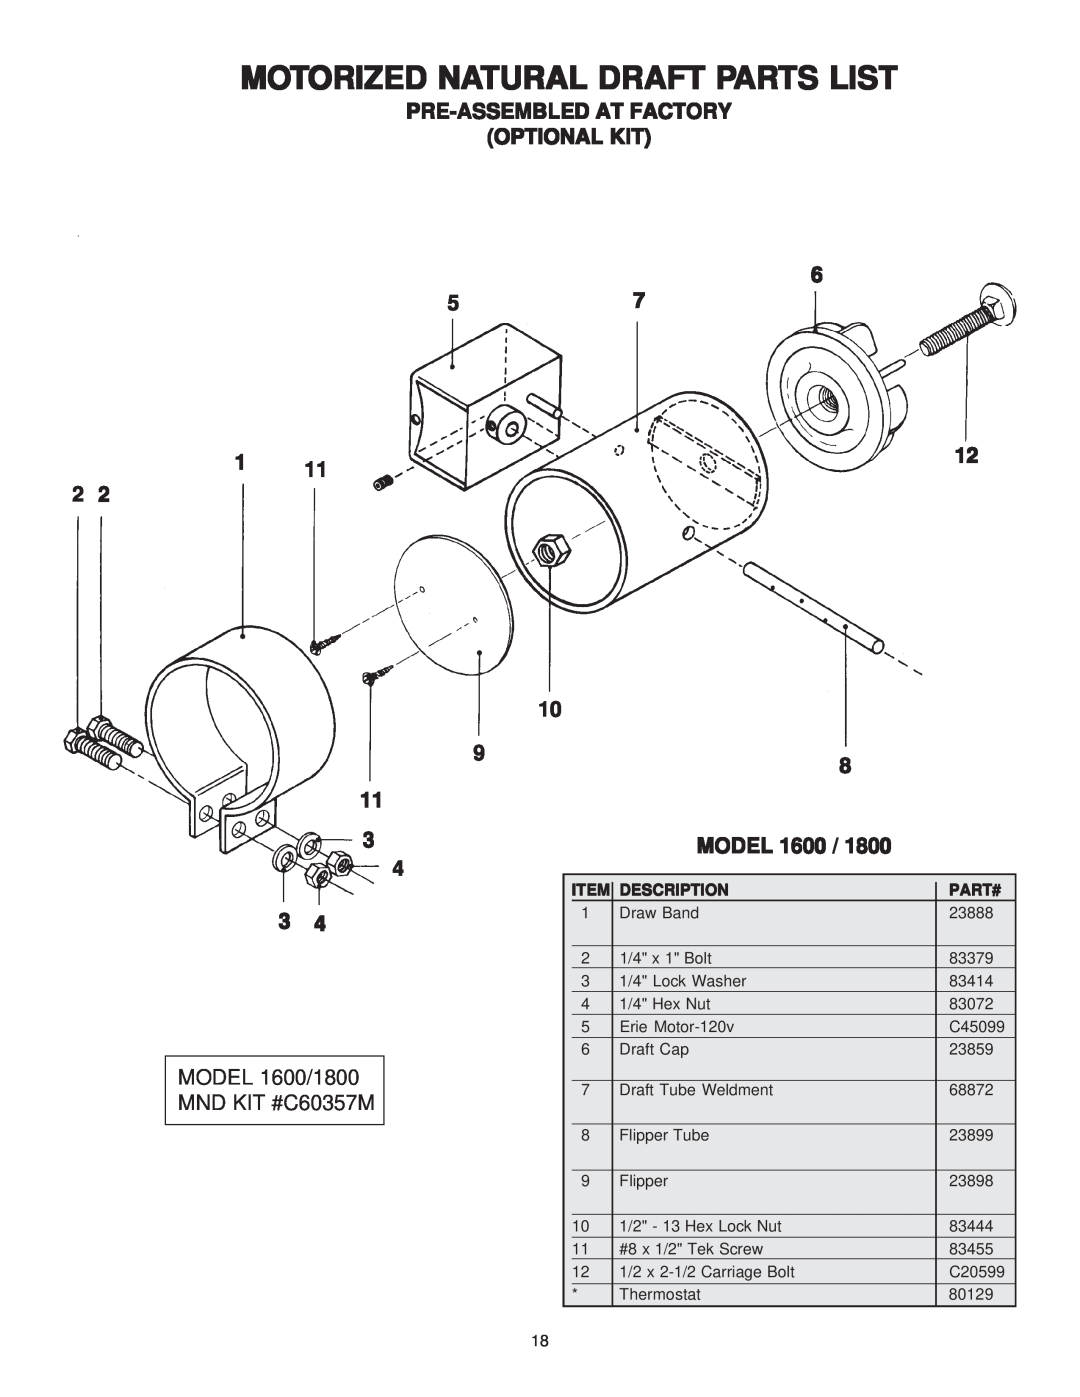 United States Stove 1800GC Motorized Natural Draft Parts List, Pre-Assembled At Factory Optional Kit, MODEL 1600, Part# 